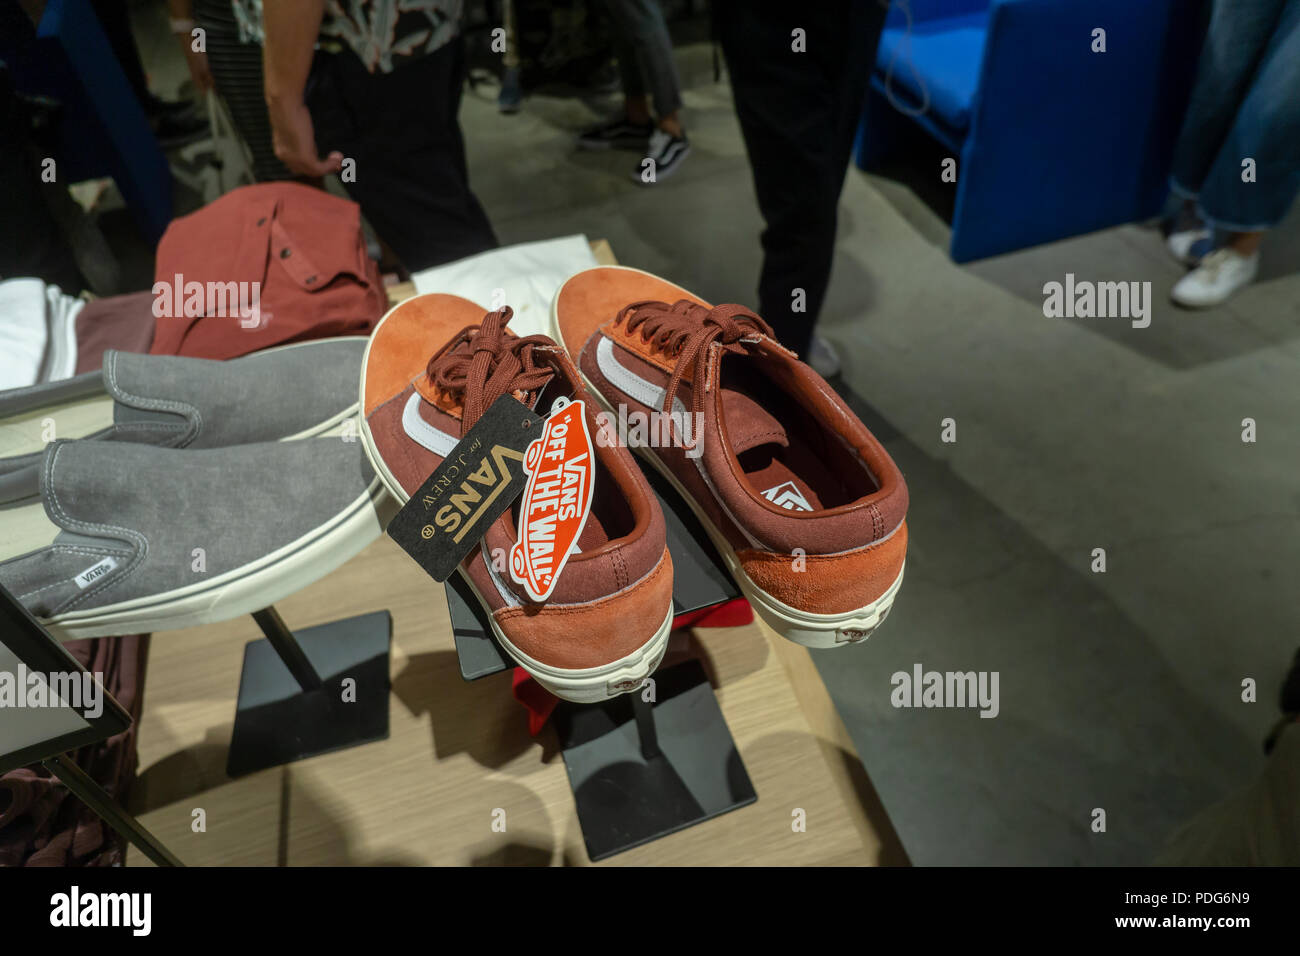 Vans brand sneakers on display the opening celebration of the new J. Crew  men's store in the Dumbo neighborhood of Brooklyn in New York on Wednesday,  August 8, 2018. The 2,100 square